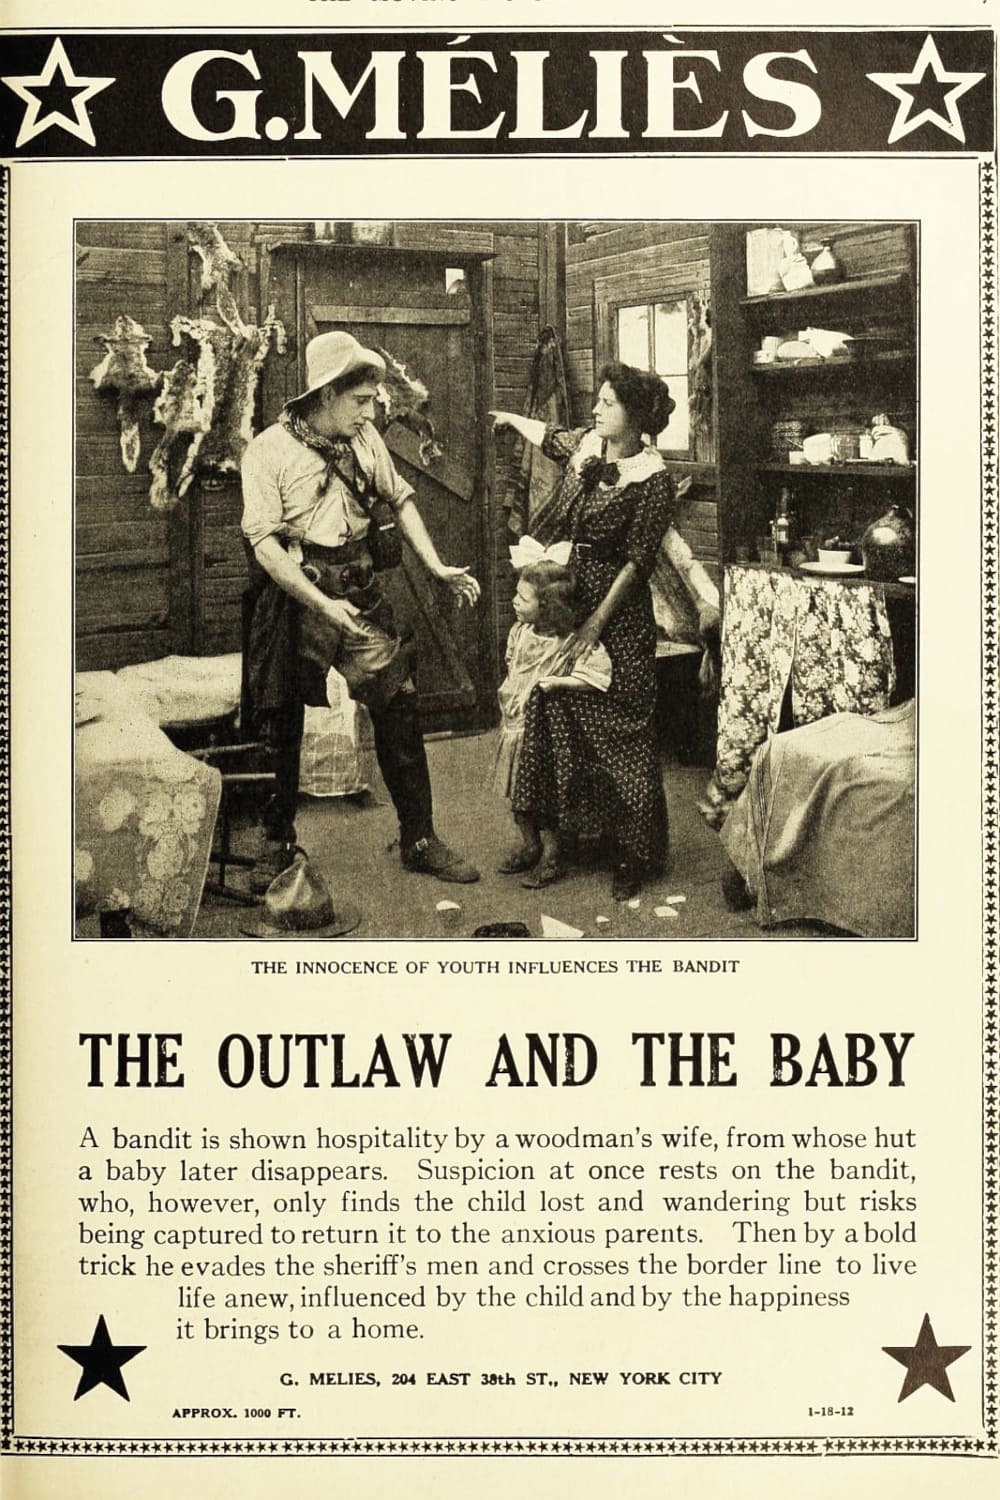 The Outlaw and the Baby